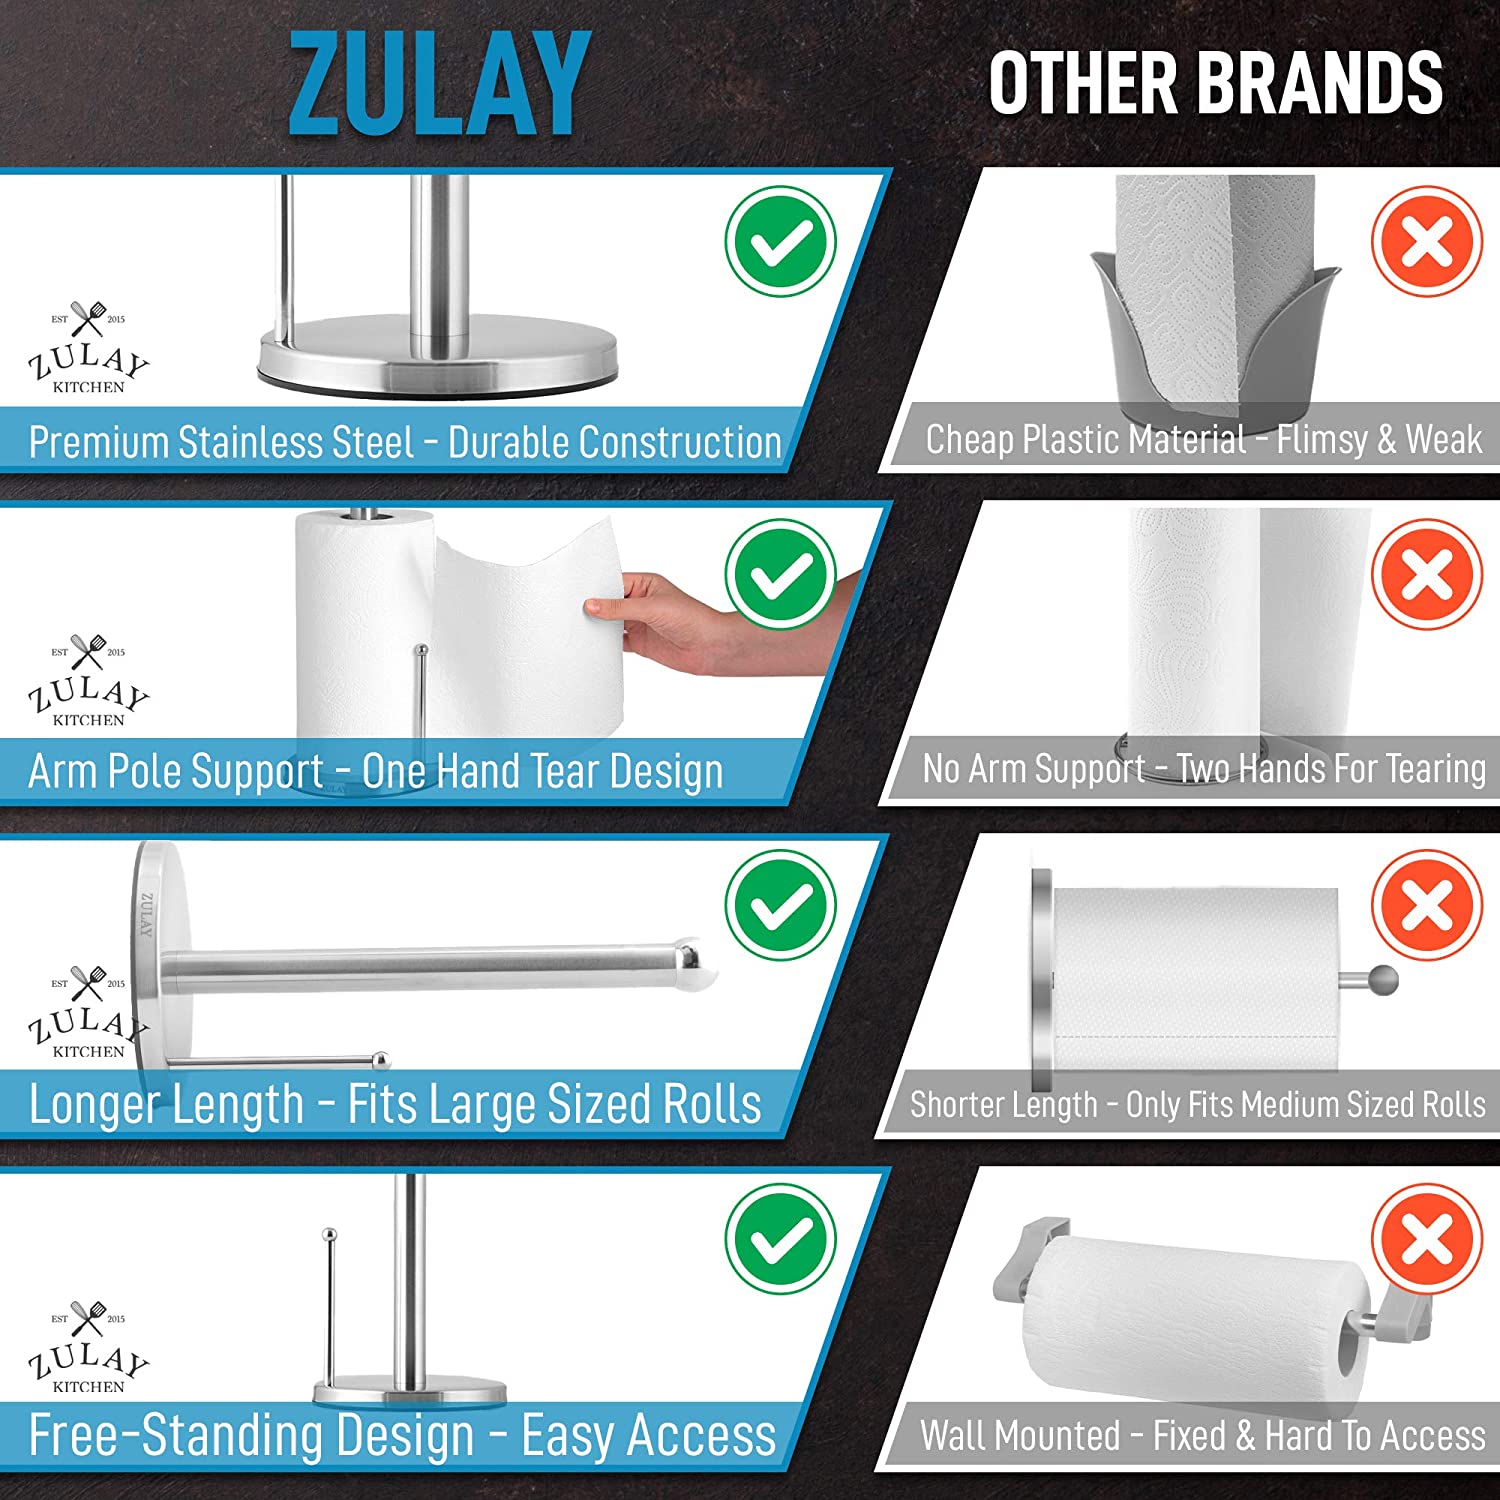 Paper Towel Holder for Standard & Large Sized Rolls - Zulay KitchenZulay Kitchen